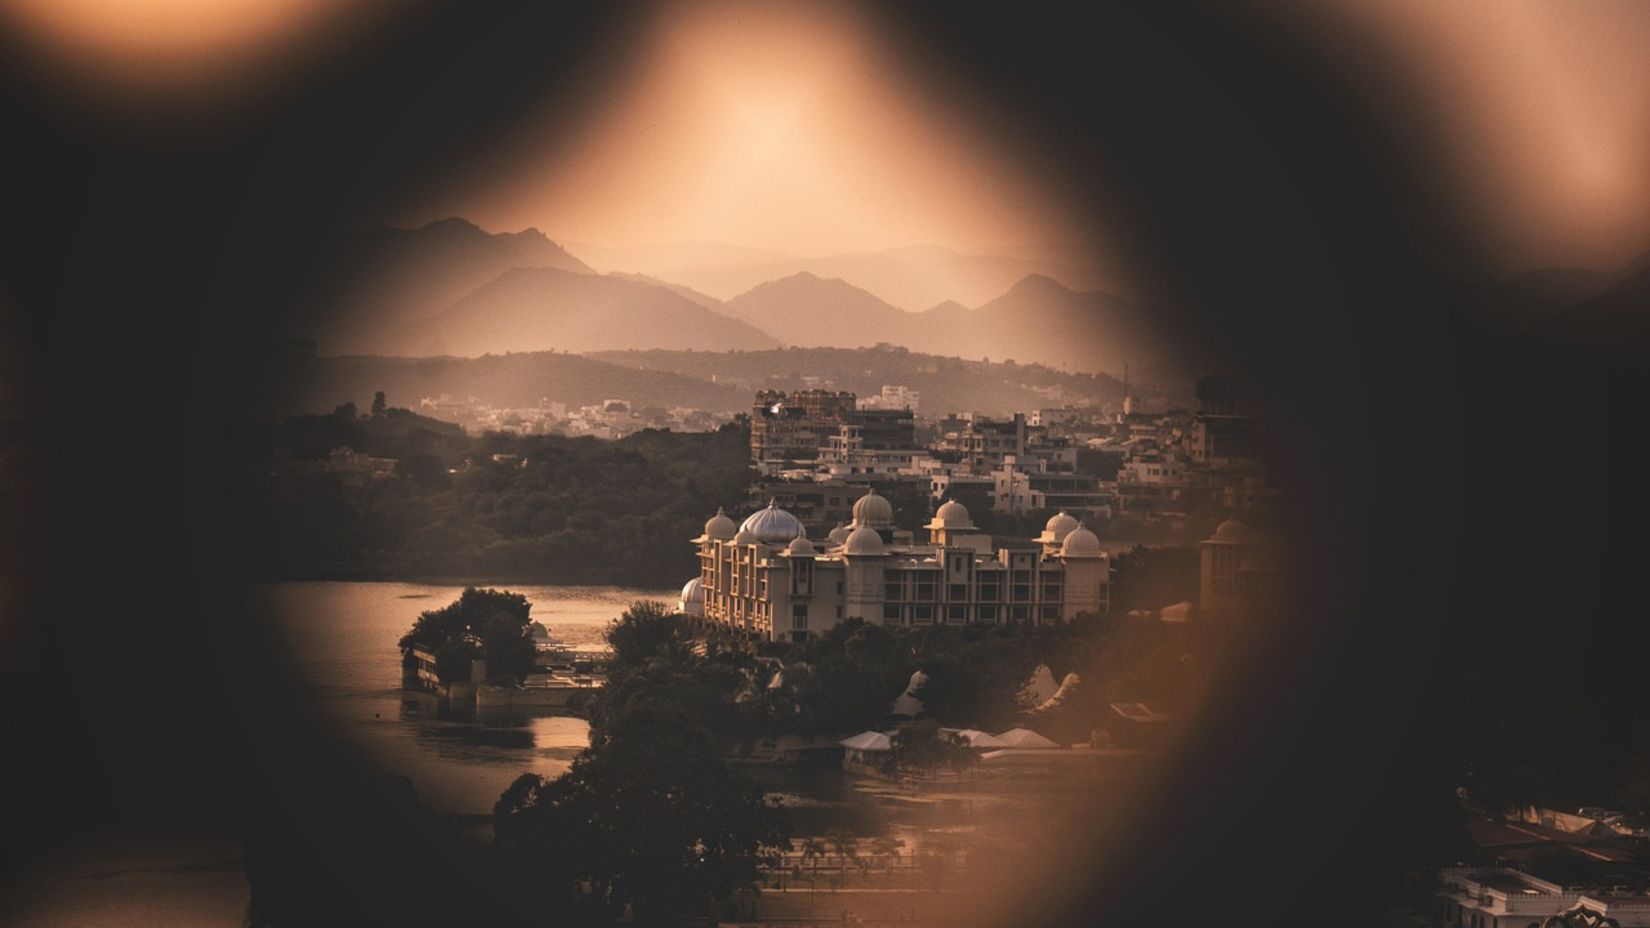 A blurry foreground revealed the Udaipur metropolis, with the shadows of mountains and the brightness of lights in the backdrop - Udaipur